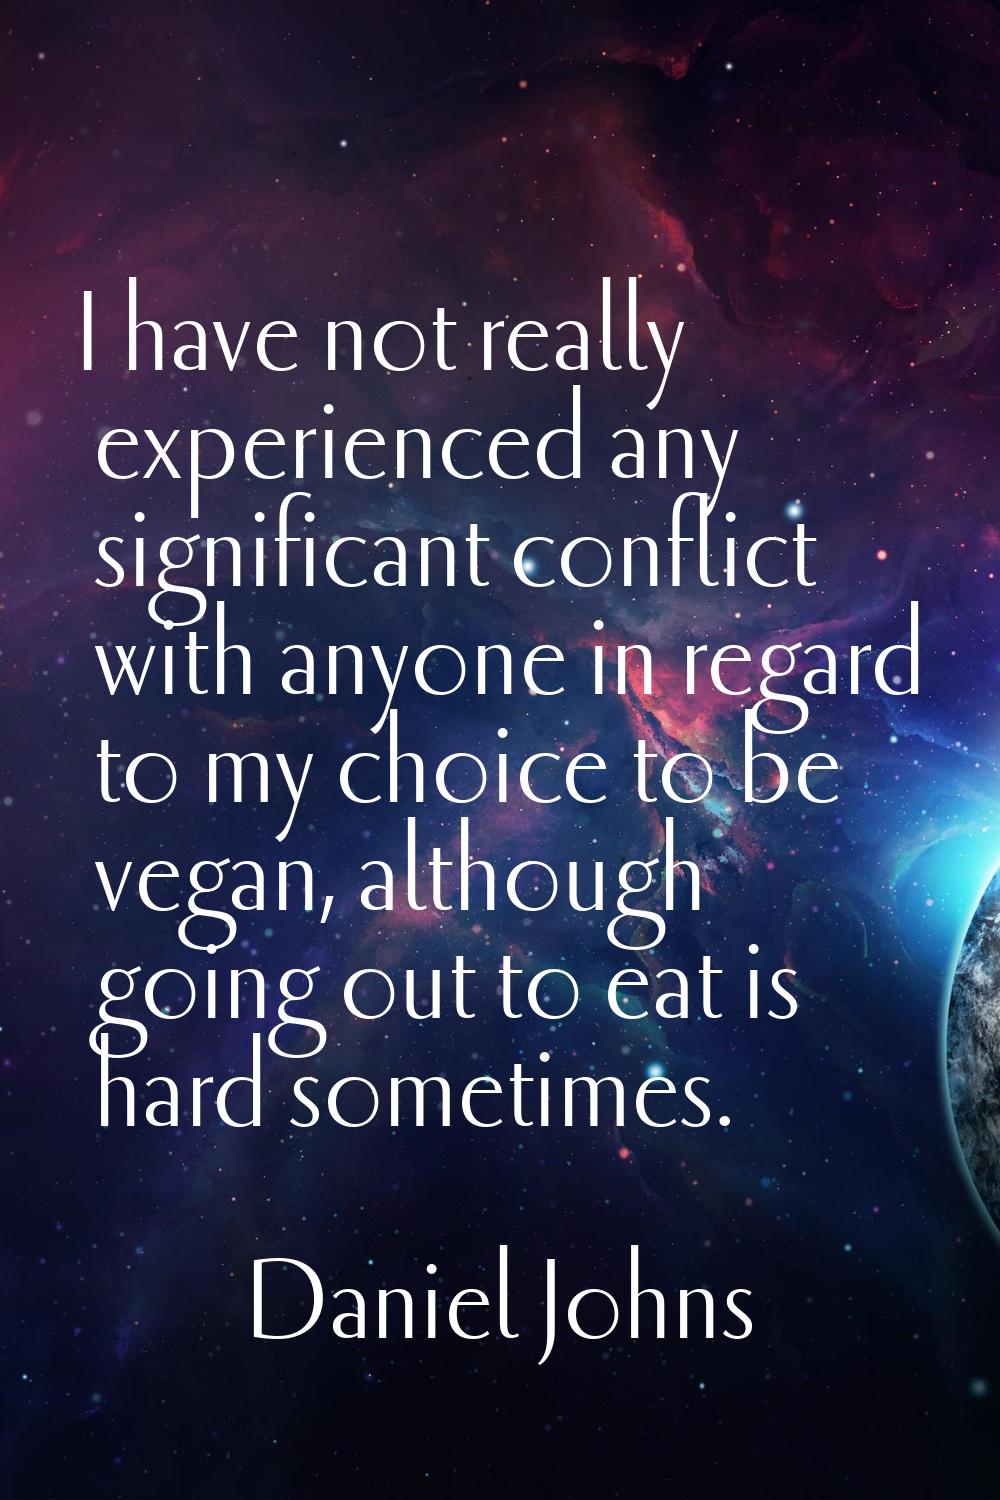 I have not really experienced any significant conflict with anyone in regard to my choice to be veg